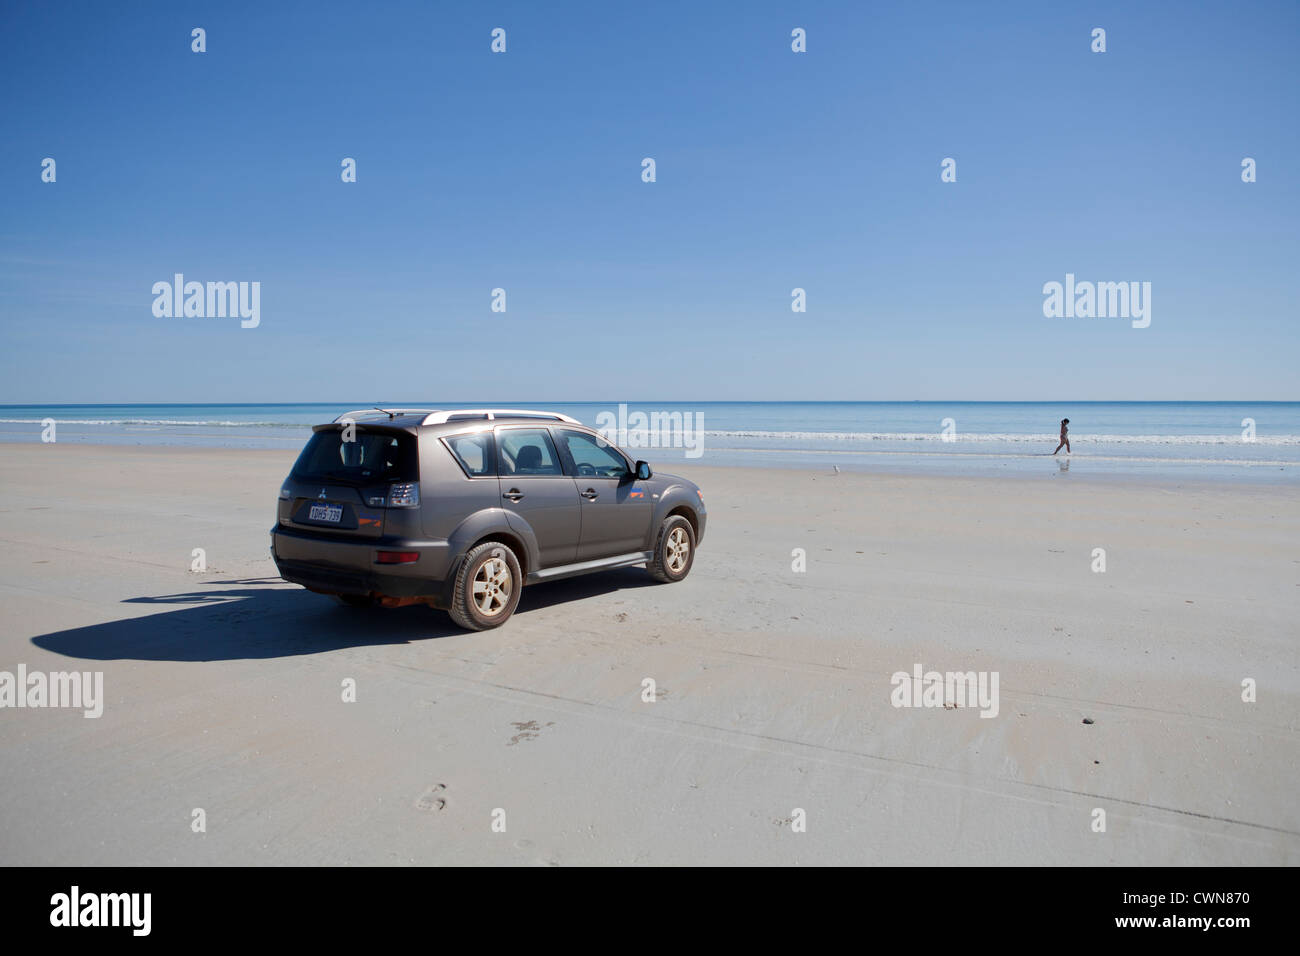 Mitsubishi Outlander 4x4 parked on Cable Beach, Broome, Western Australia Stock Photo